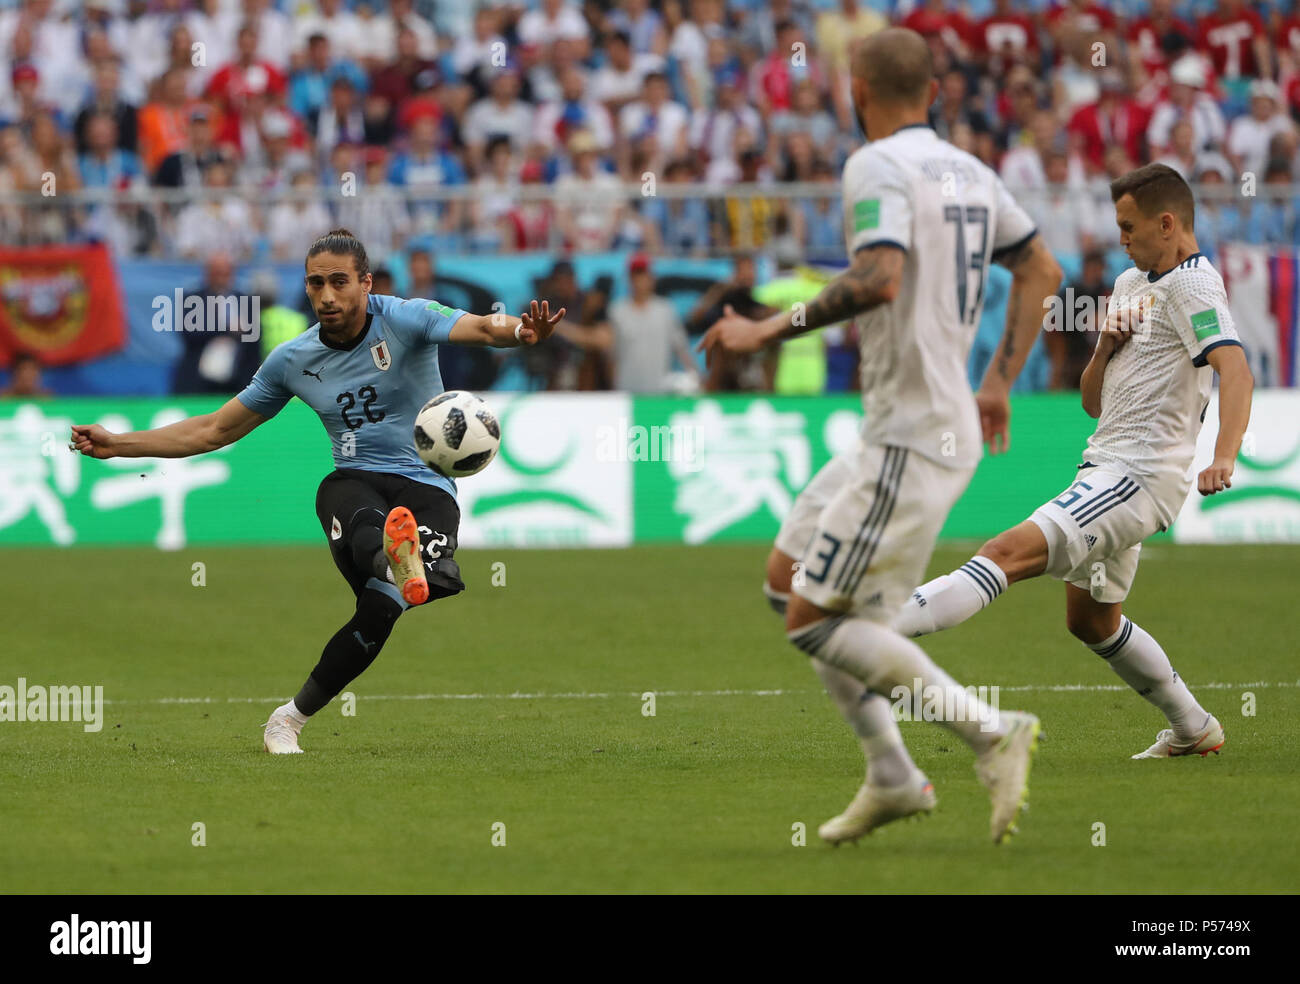 Samara, Russia. 25th June, 2018. Martin Caceres (L) of Uruguay competes during the 2018 FIFA World Cup Group A match between Uruguay and Russia in Samara, Russia, June 25, 2018. Credit: Bai Xueqi/Xinhua/Alamy Live News Stock Photo